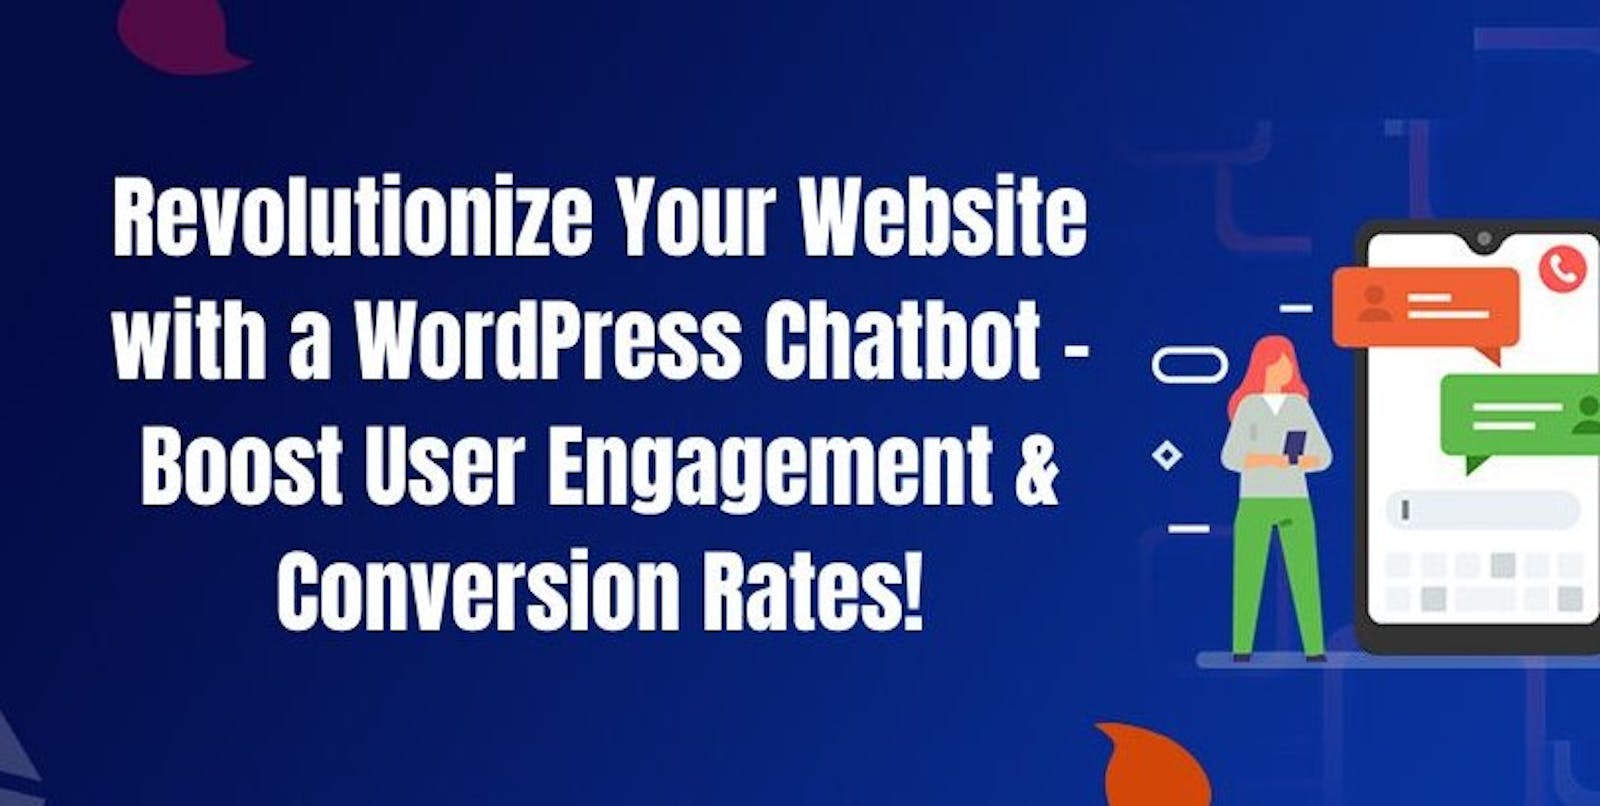 Revolutionize Your Website with a WordPress Chatbot - Boost User Engagement & Conversion Rates!